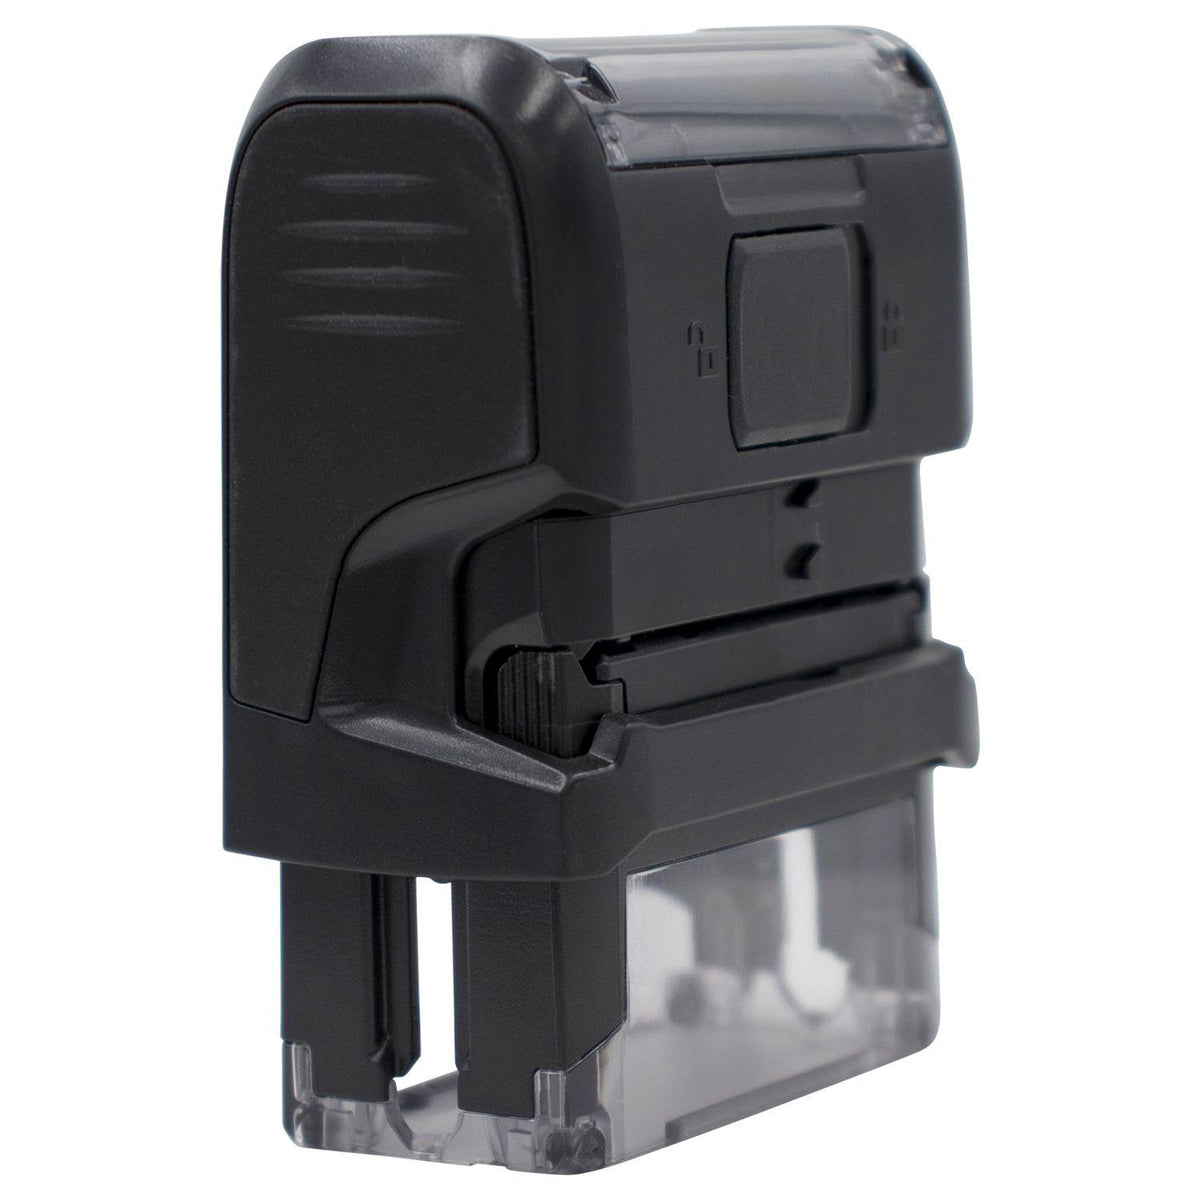 Self-Inking Correo Aero Stamp - Engineer Seal Stamps - Brand_Trodat, Impression Size_Small, Stamp Type_Self-Inking Stamp, Type of Use_Postal &amp; Mailing, Type of Use_Shipping &amp; Receiving